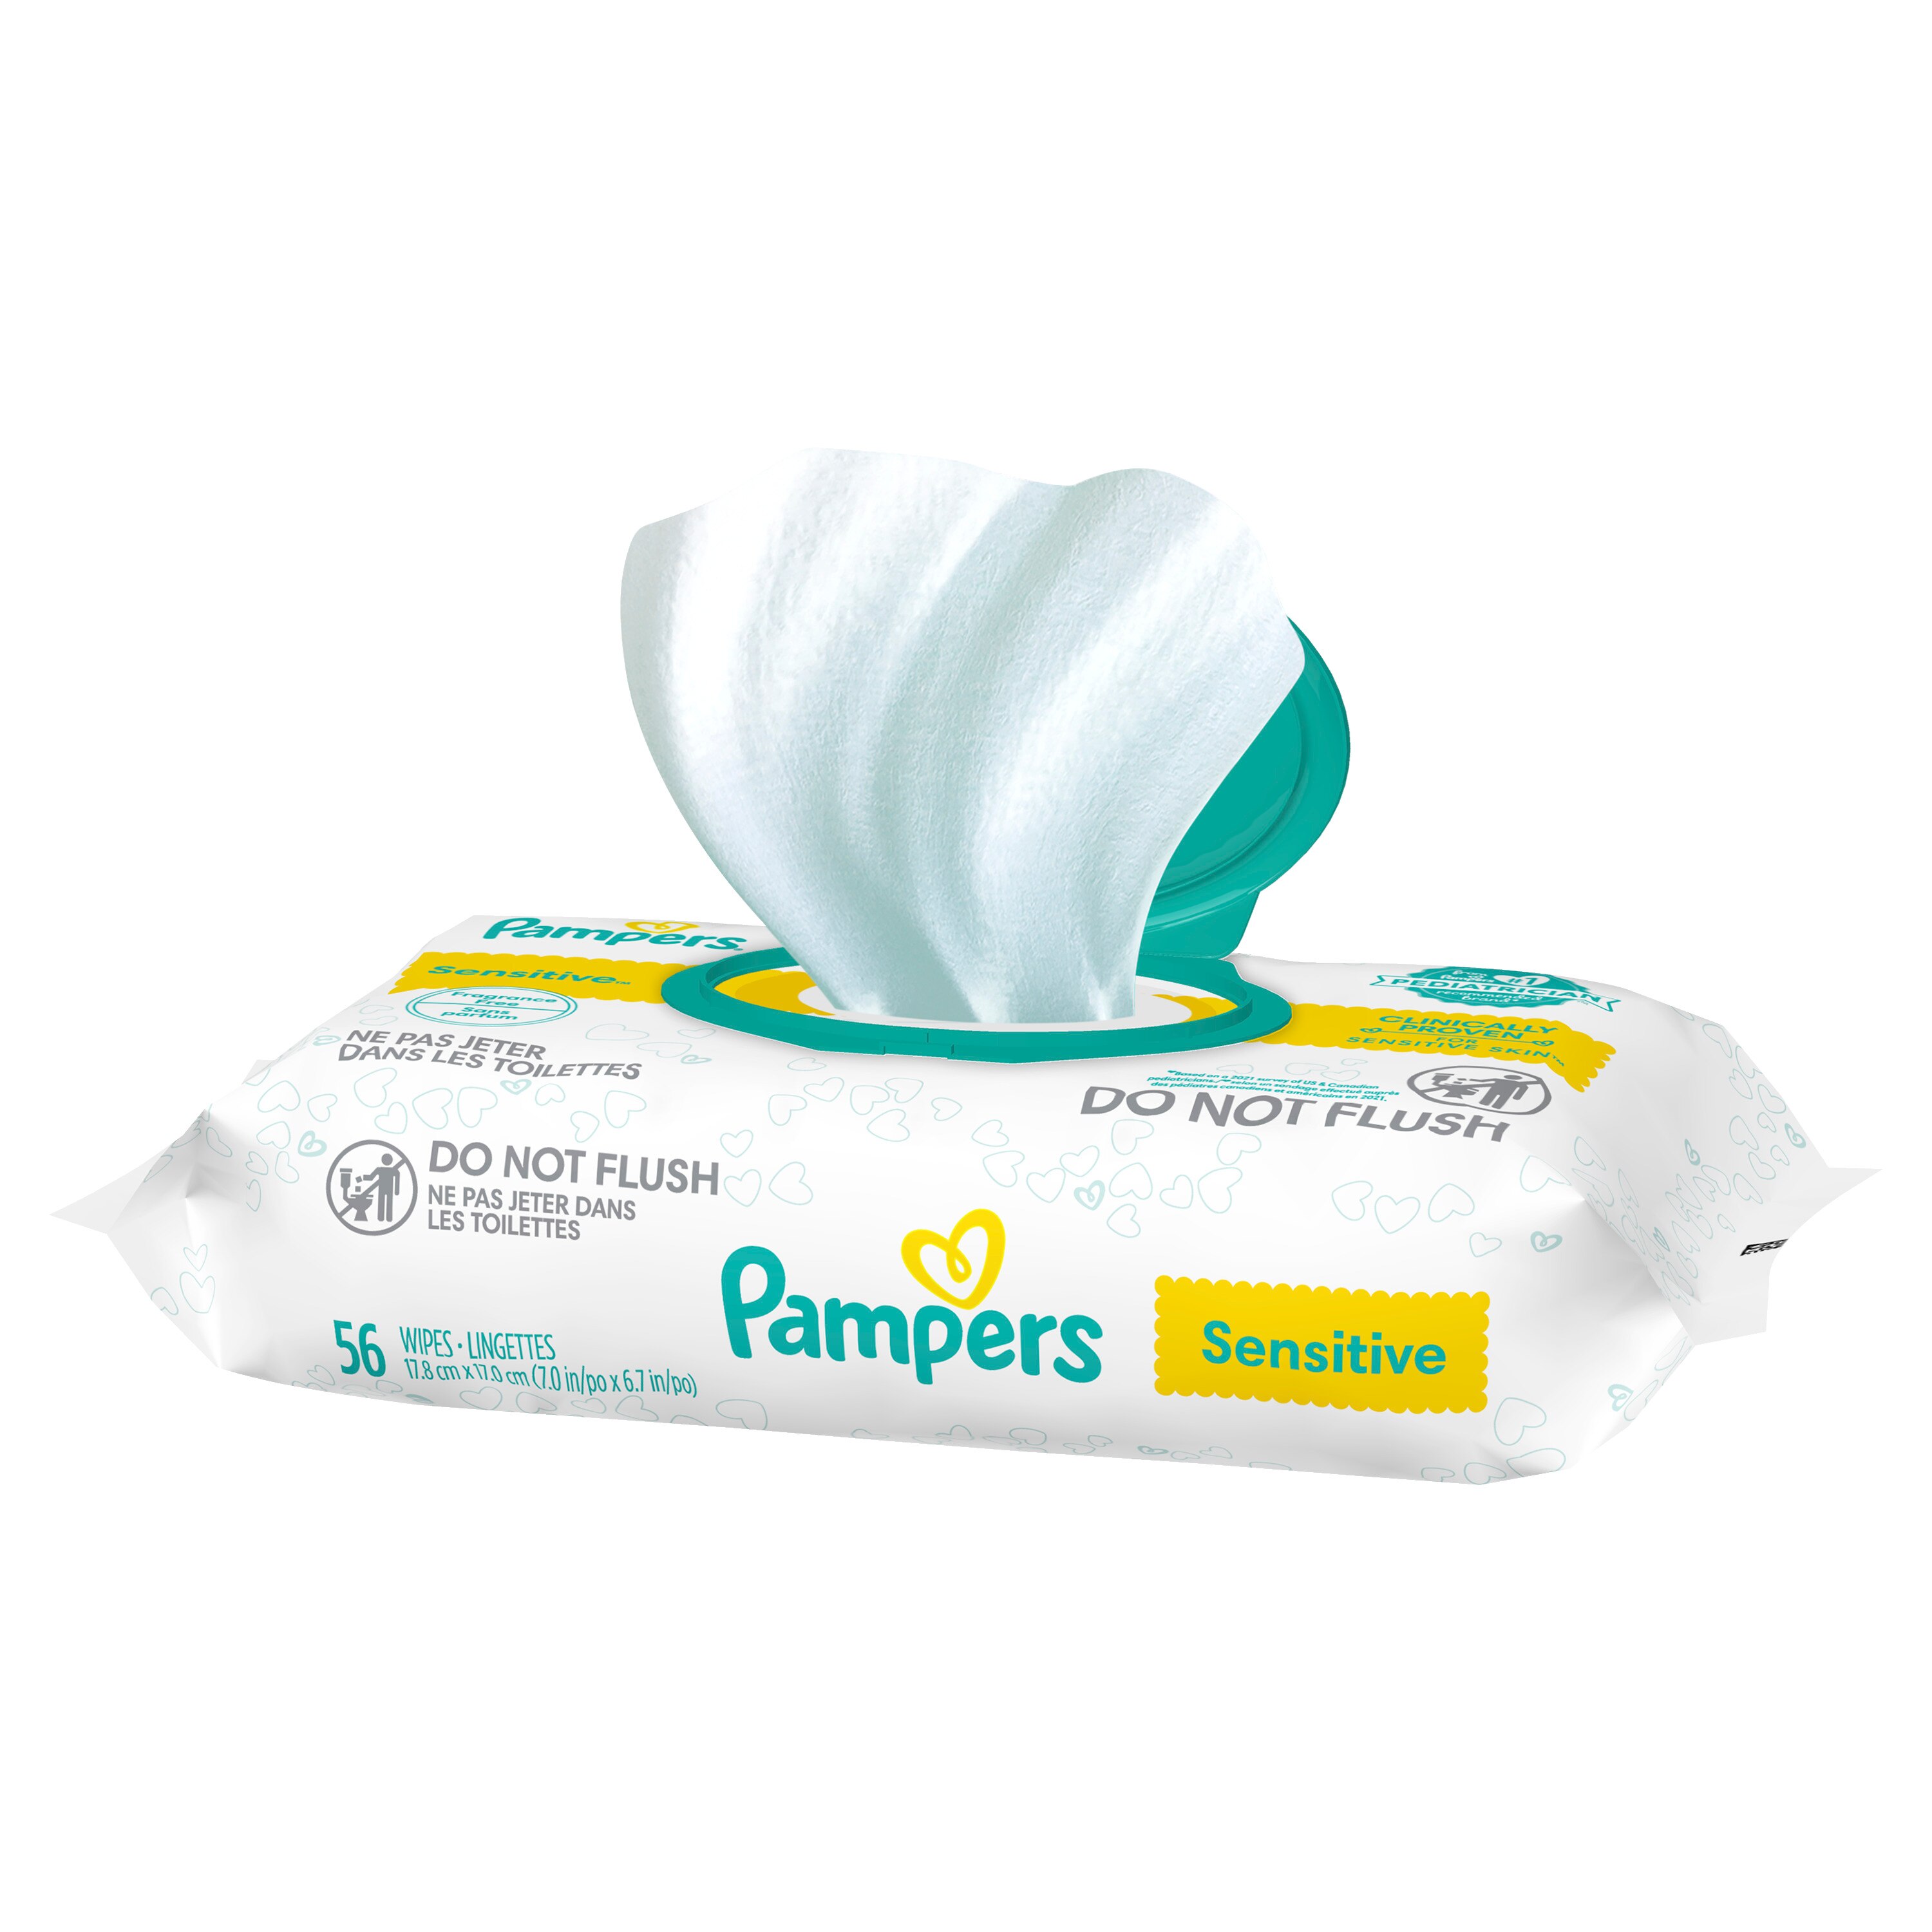 Pampers Baby Wipes Sensitive Pop-Top 56/Pack | Pick Up Store TODAY at CVS